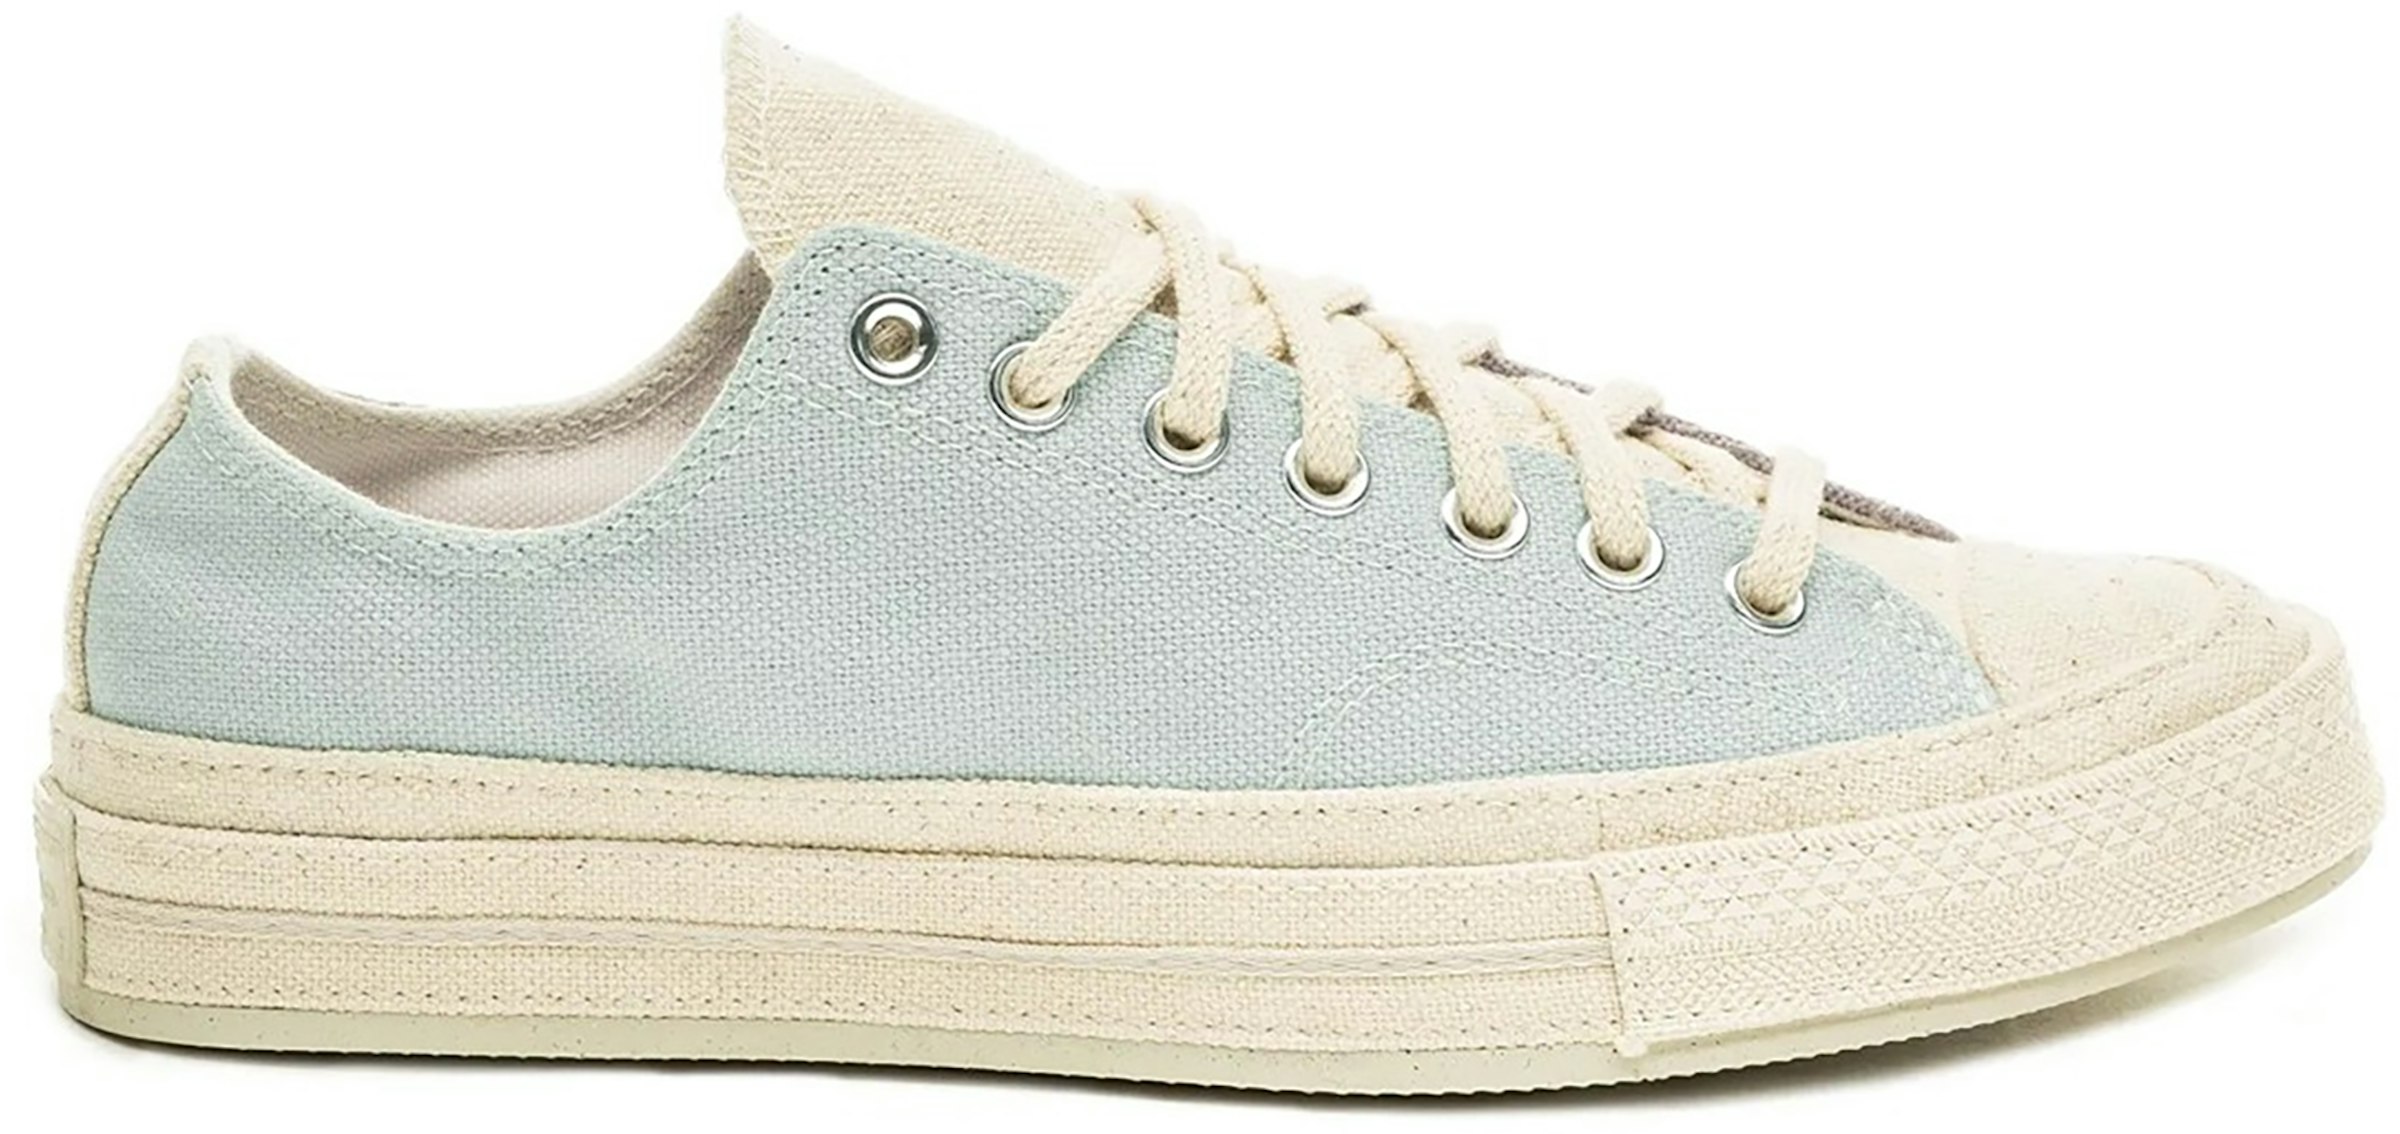 Converse Taylor All-Star 70 Ox Men's - 167772C US